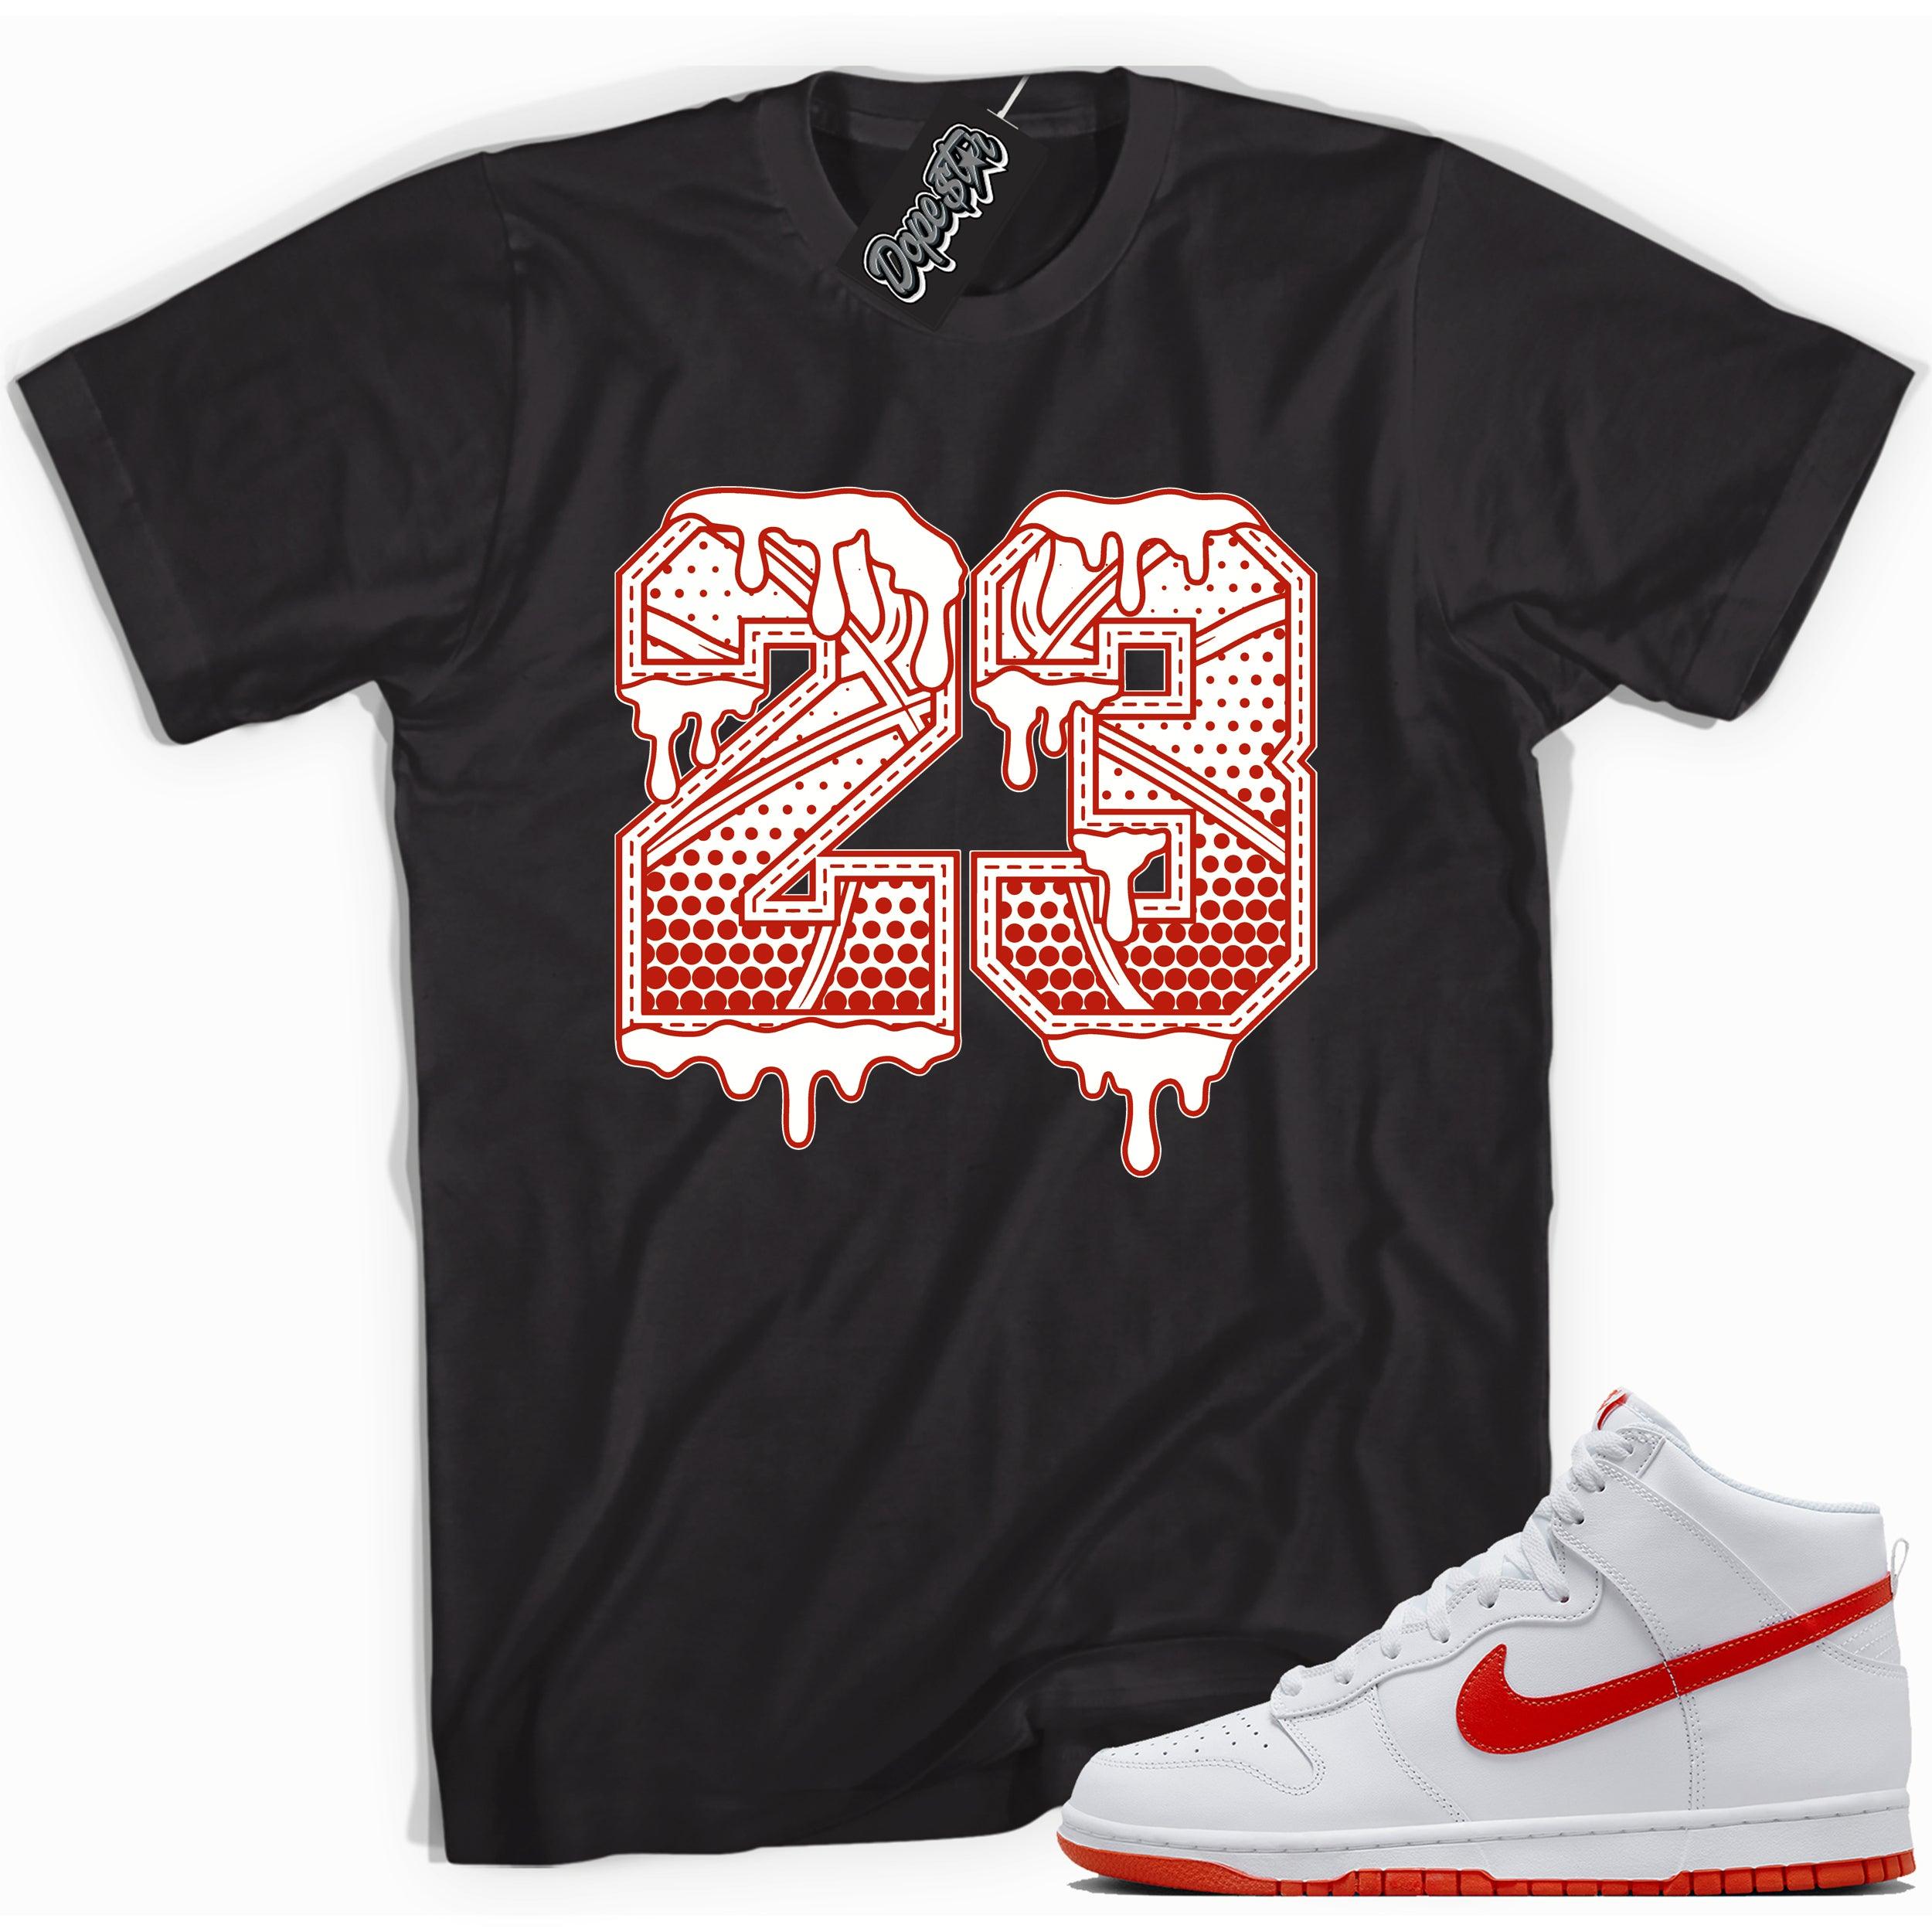 Cool black graphic tee with '23 basket ball' print, that perfectly matches Nike Dunk High White Picante Red sneakers.